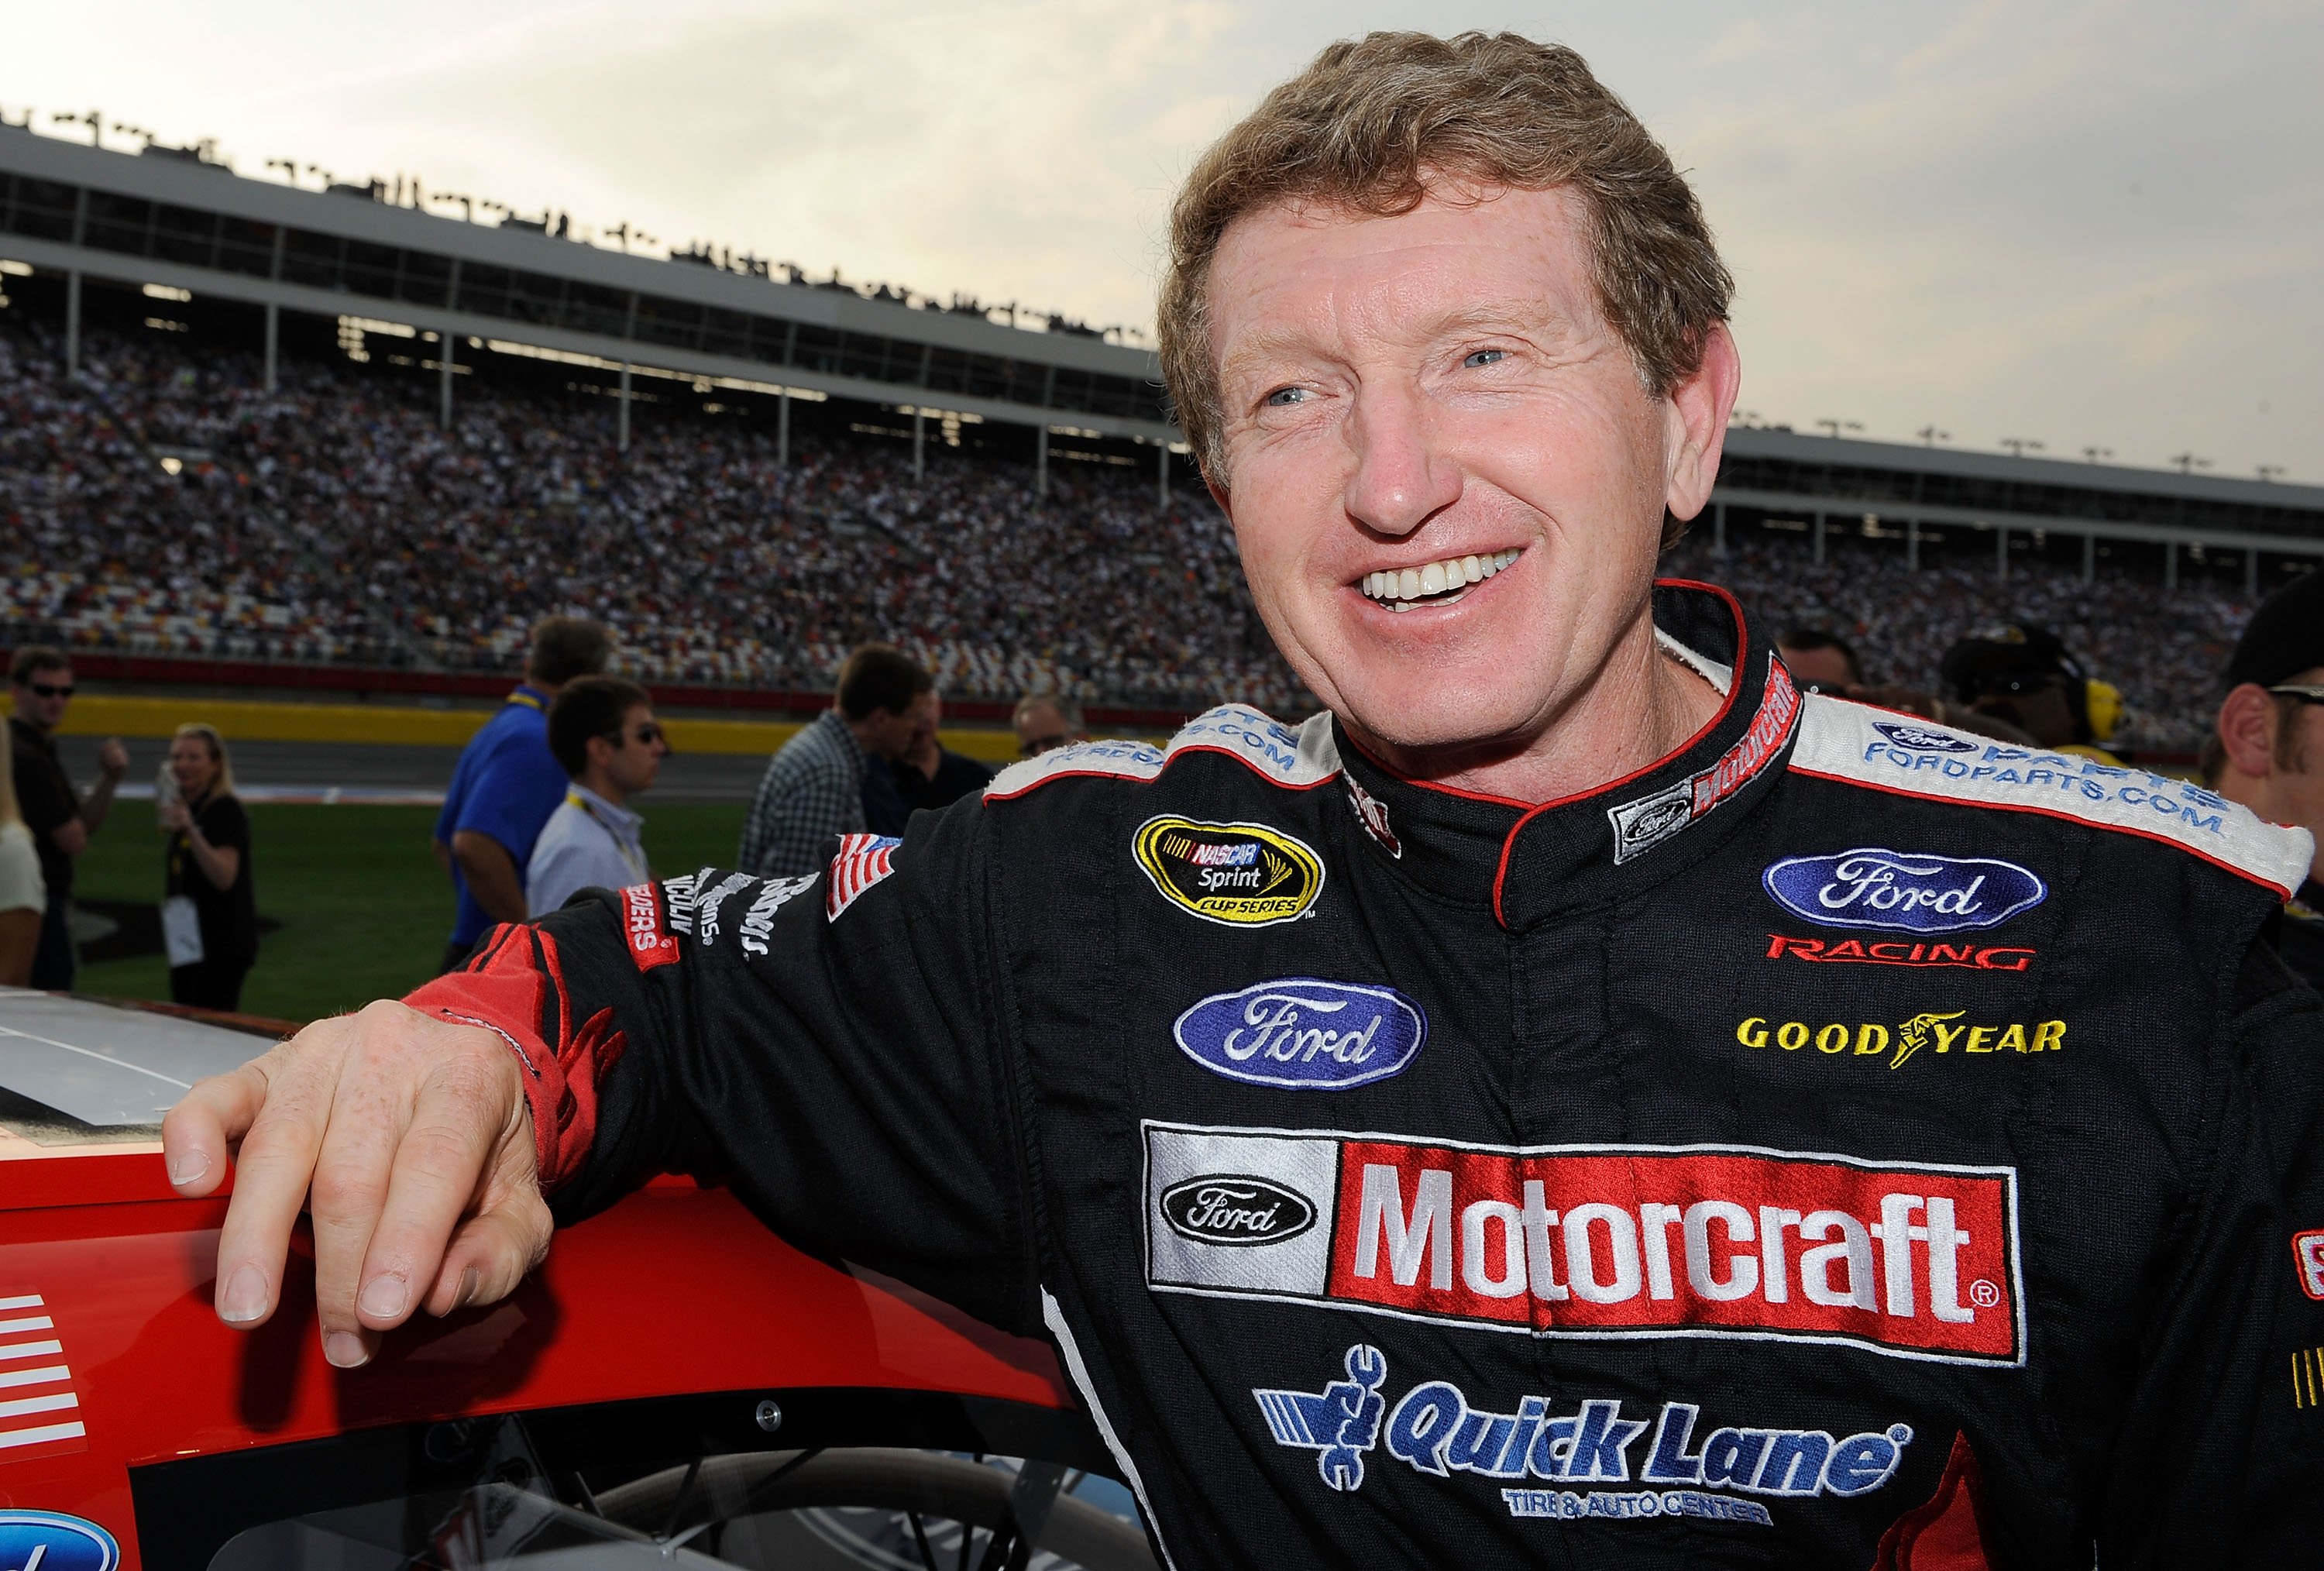 CONCORD, NC - MAY 22:  Bill Elliott, driver of the #21 Motorcraft Ford, stands next to his car on the grid prior to the start of the NASCAR Sprint Showdown at Charlotte Motor Speedway on May 22, 2010 in Concord, North Carolina.  (Photo by Rusty Jarrett/Ge